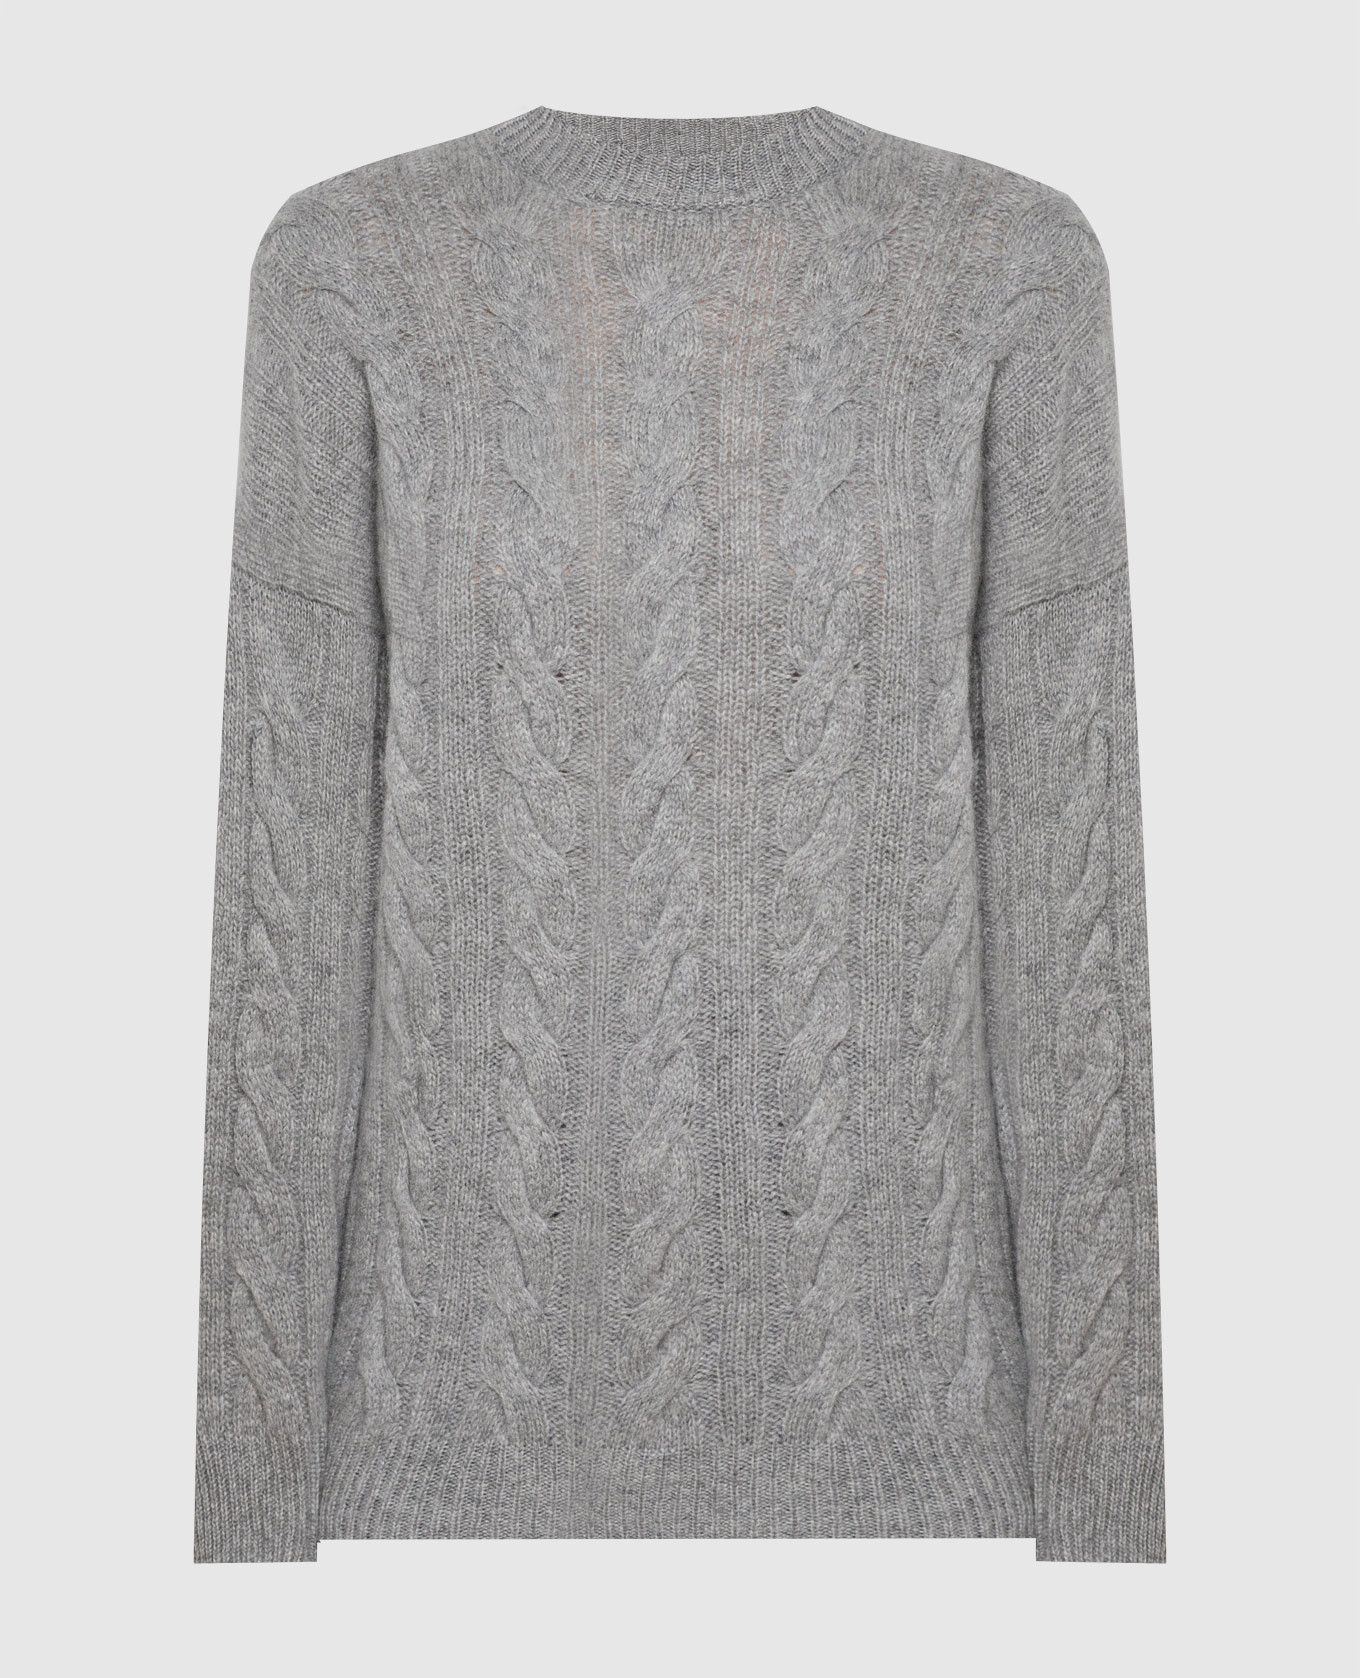 Gray sweater made of wool and cashmere in a textured pattern